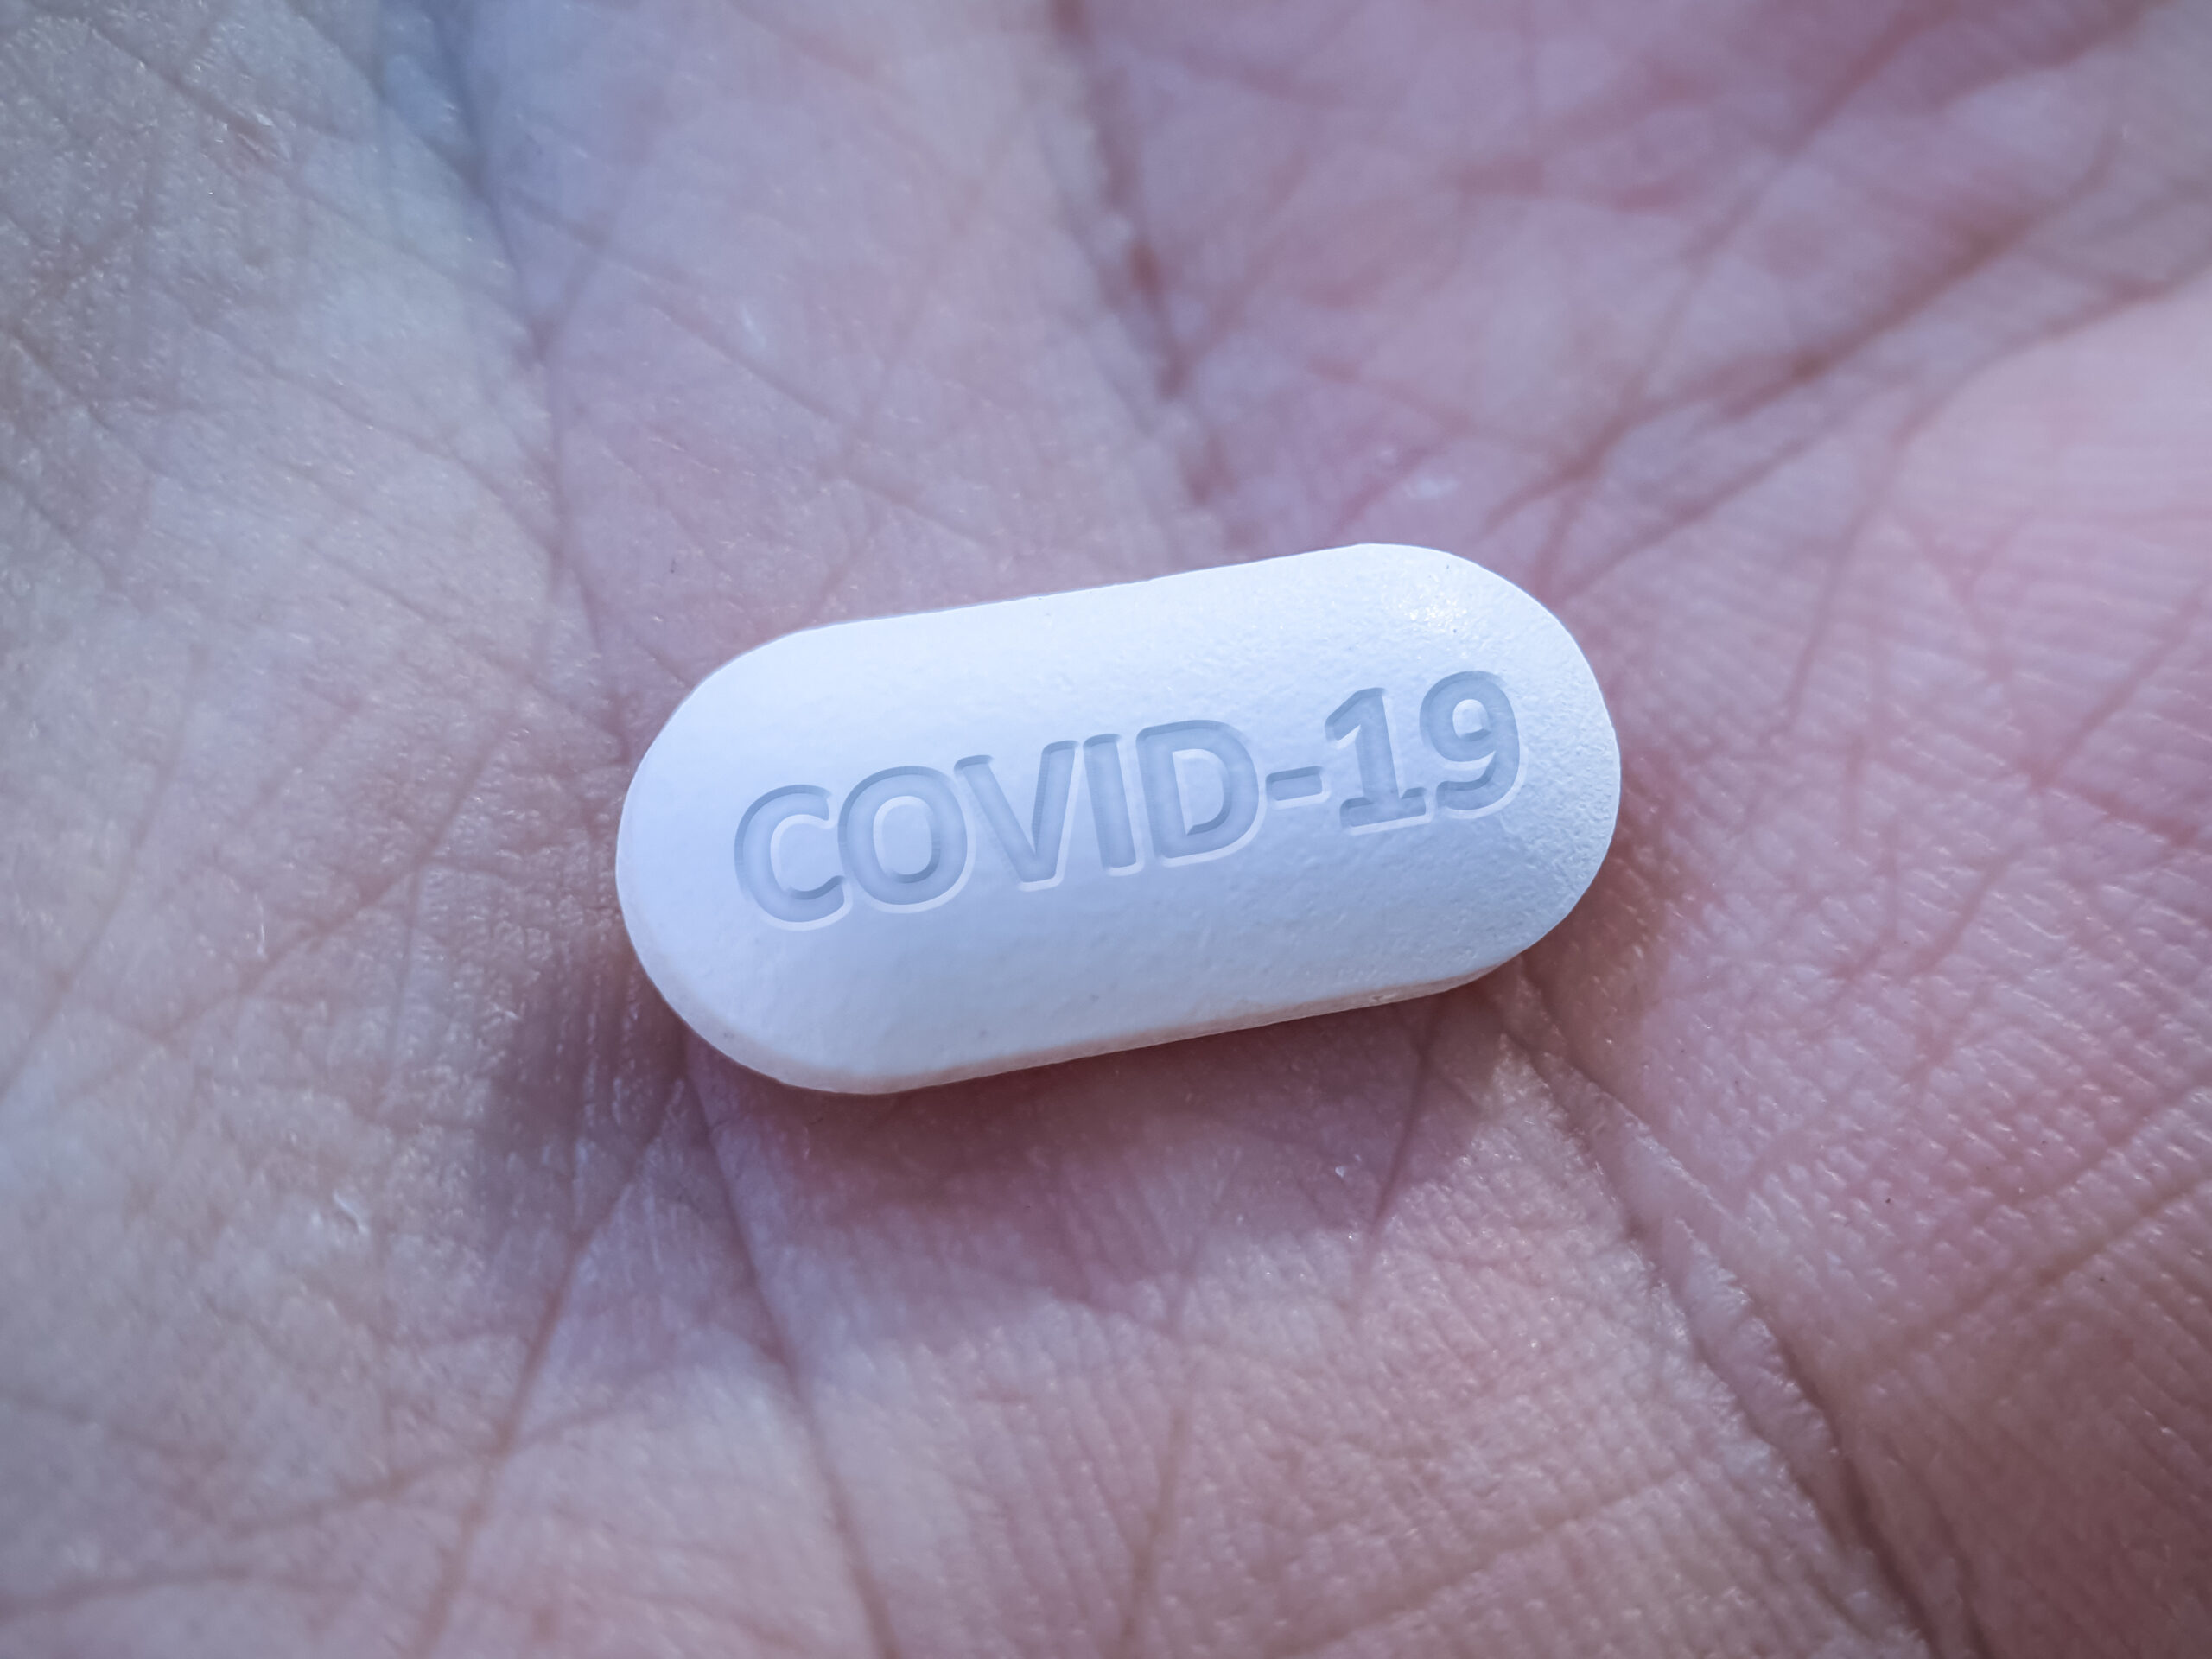 Baricitinib Plus Remdesivir Shows Promise For Treating COVID-19